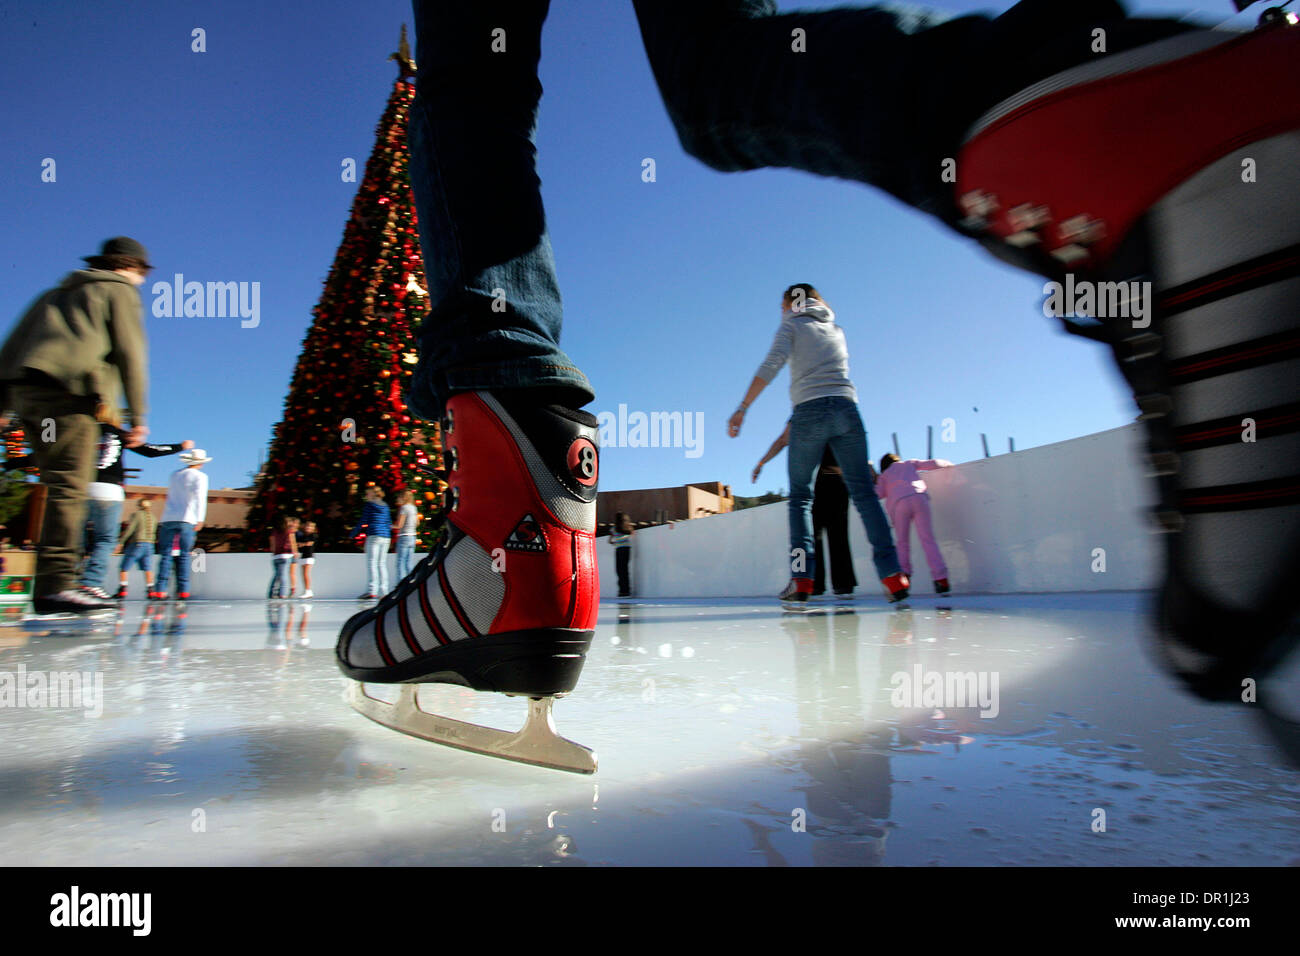 NOVEMBER 29, 2008, ALPINE, CALIFORNIA, USA ................. Skaters at the  Viejas Outlet Center's outdoor holiday ice rink make their way around the  rink during a sunny afternoon. ...........................................  MANDATORY CREDIT SAN DIEGO